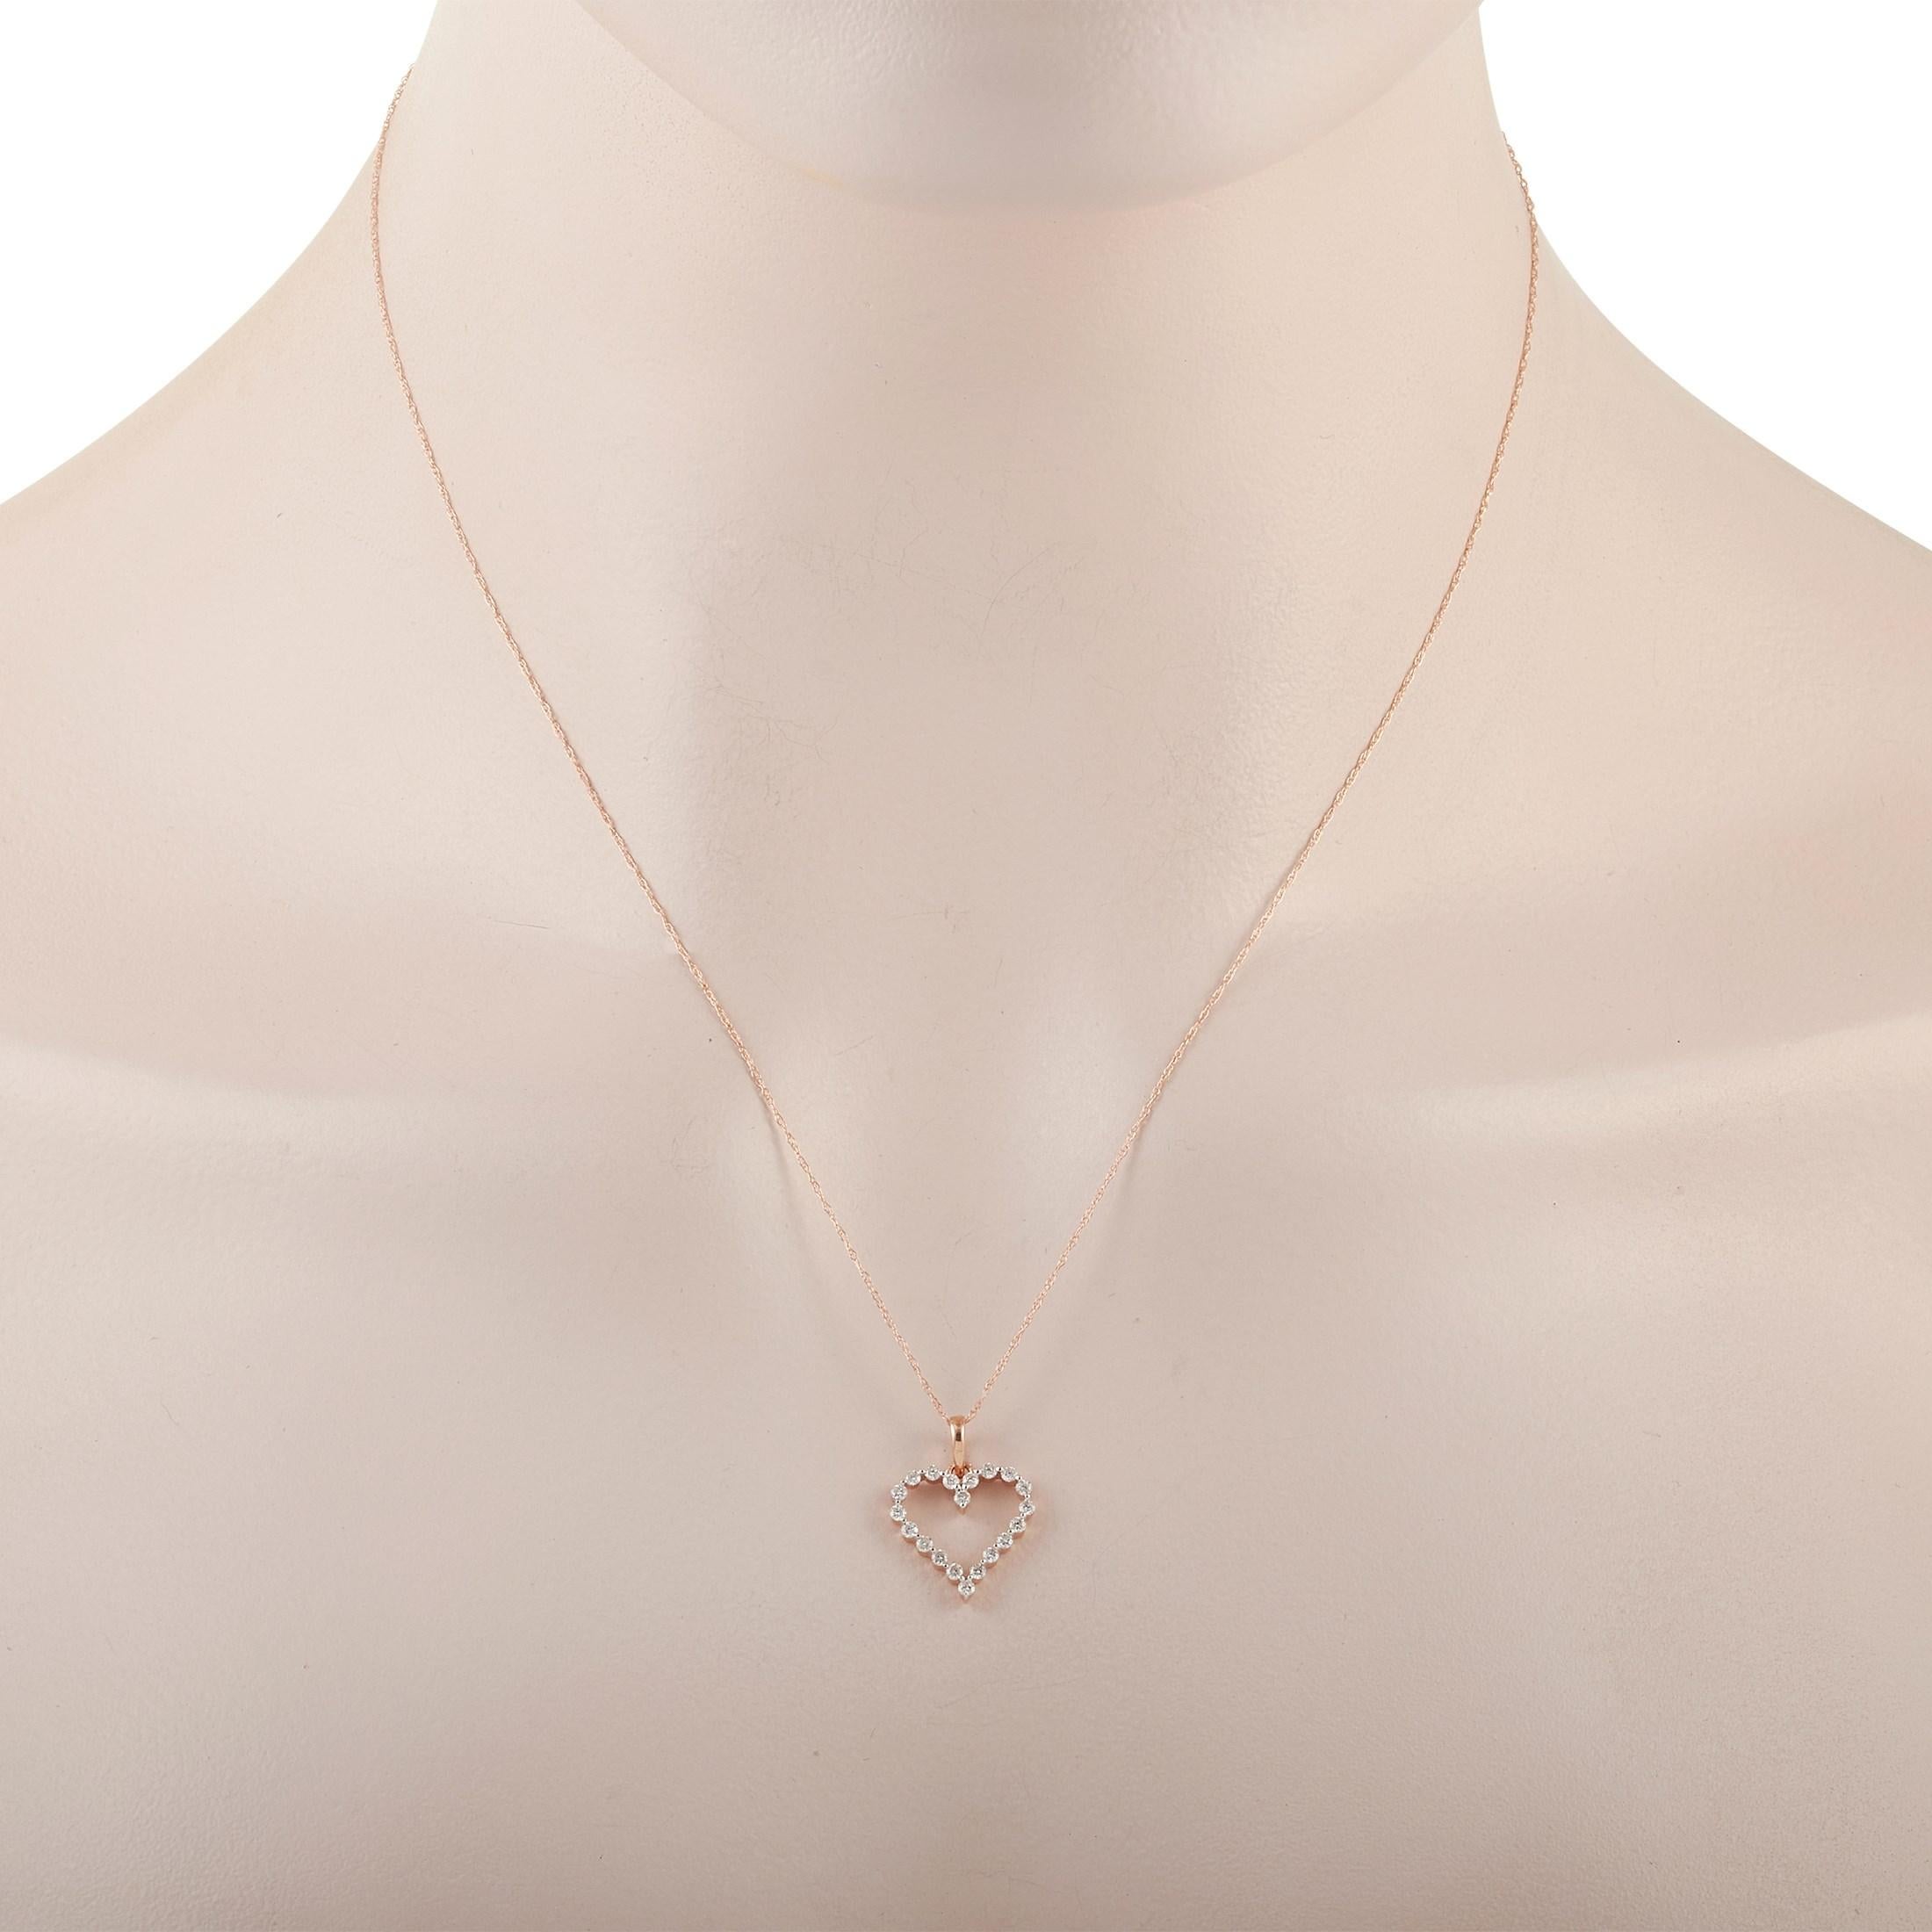 This LB Exclusive 14K Rose Gold Diamond Heart Pendant Necklace features a delicate 14K Rose Gold chain measuring 17 inches in length. The necklace features a heart-shaped pendant set with 0.33 carats of round-cut diamonds. The pendant measures 0.75